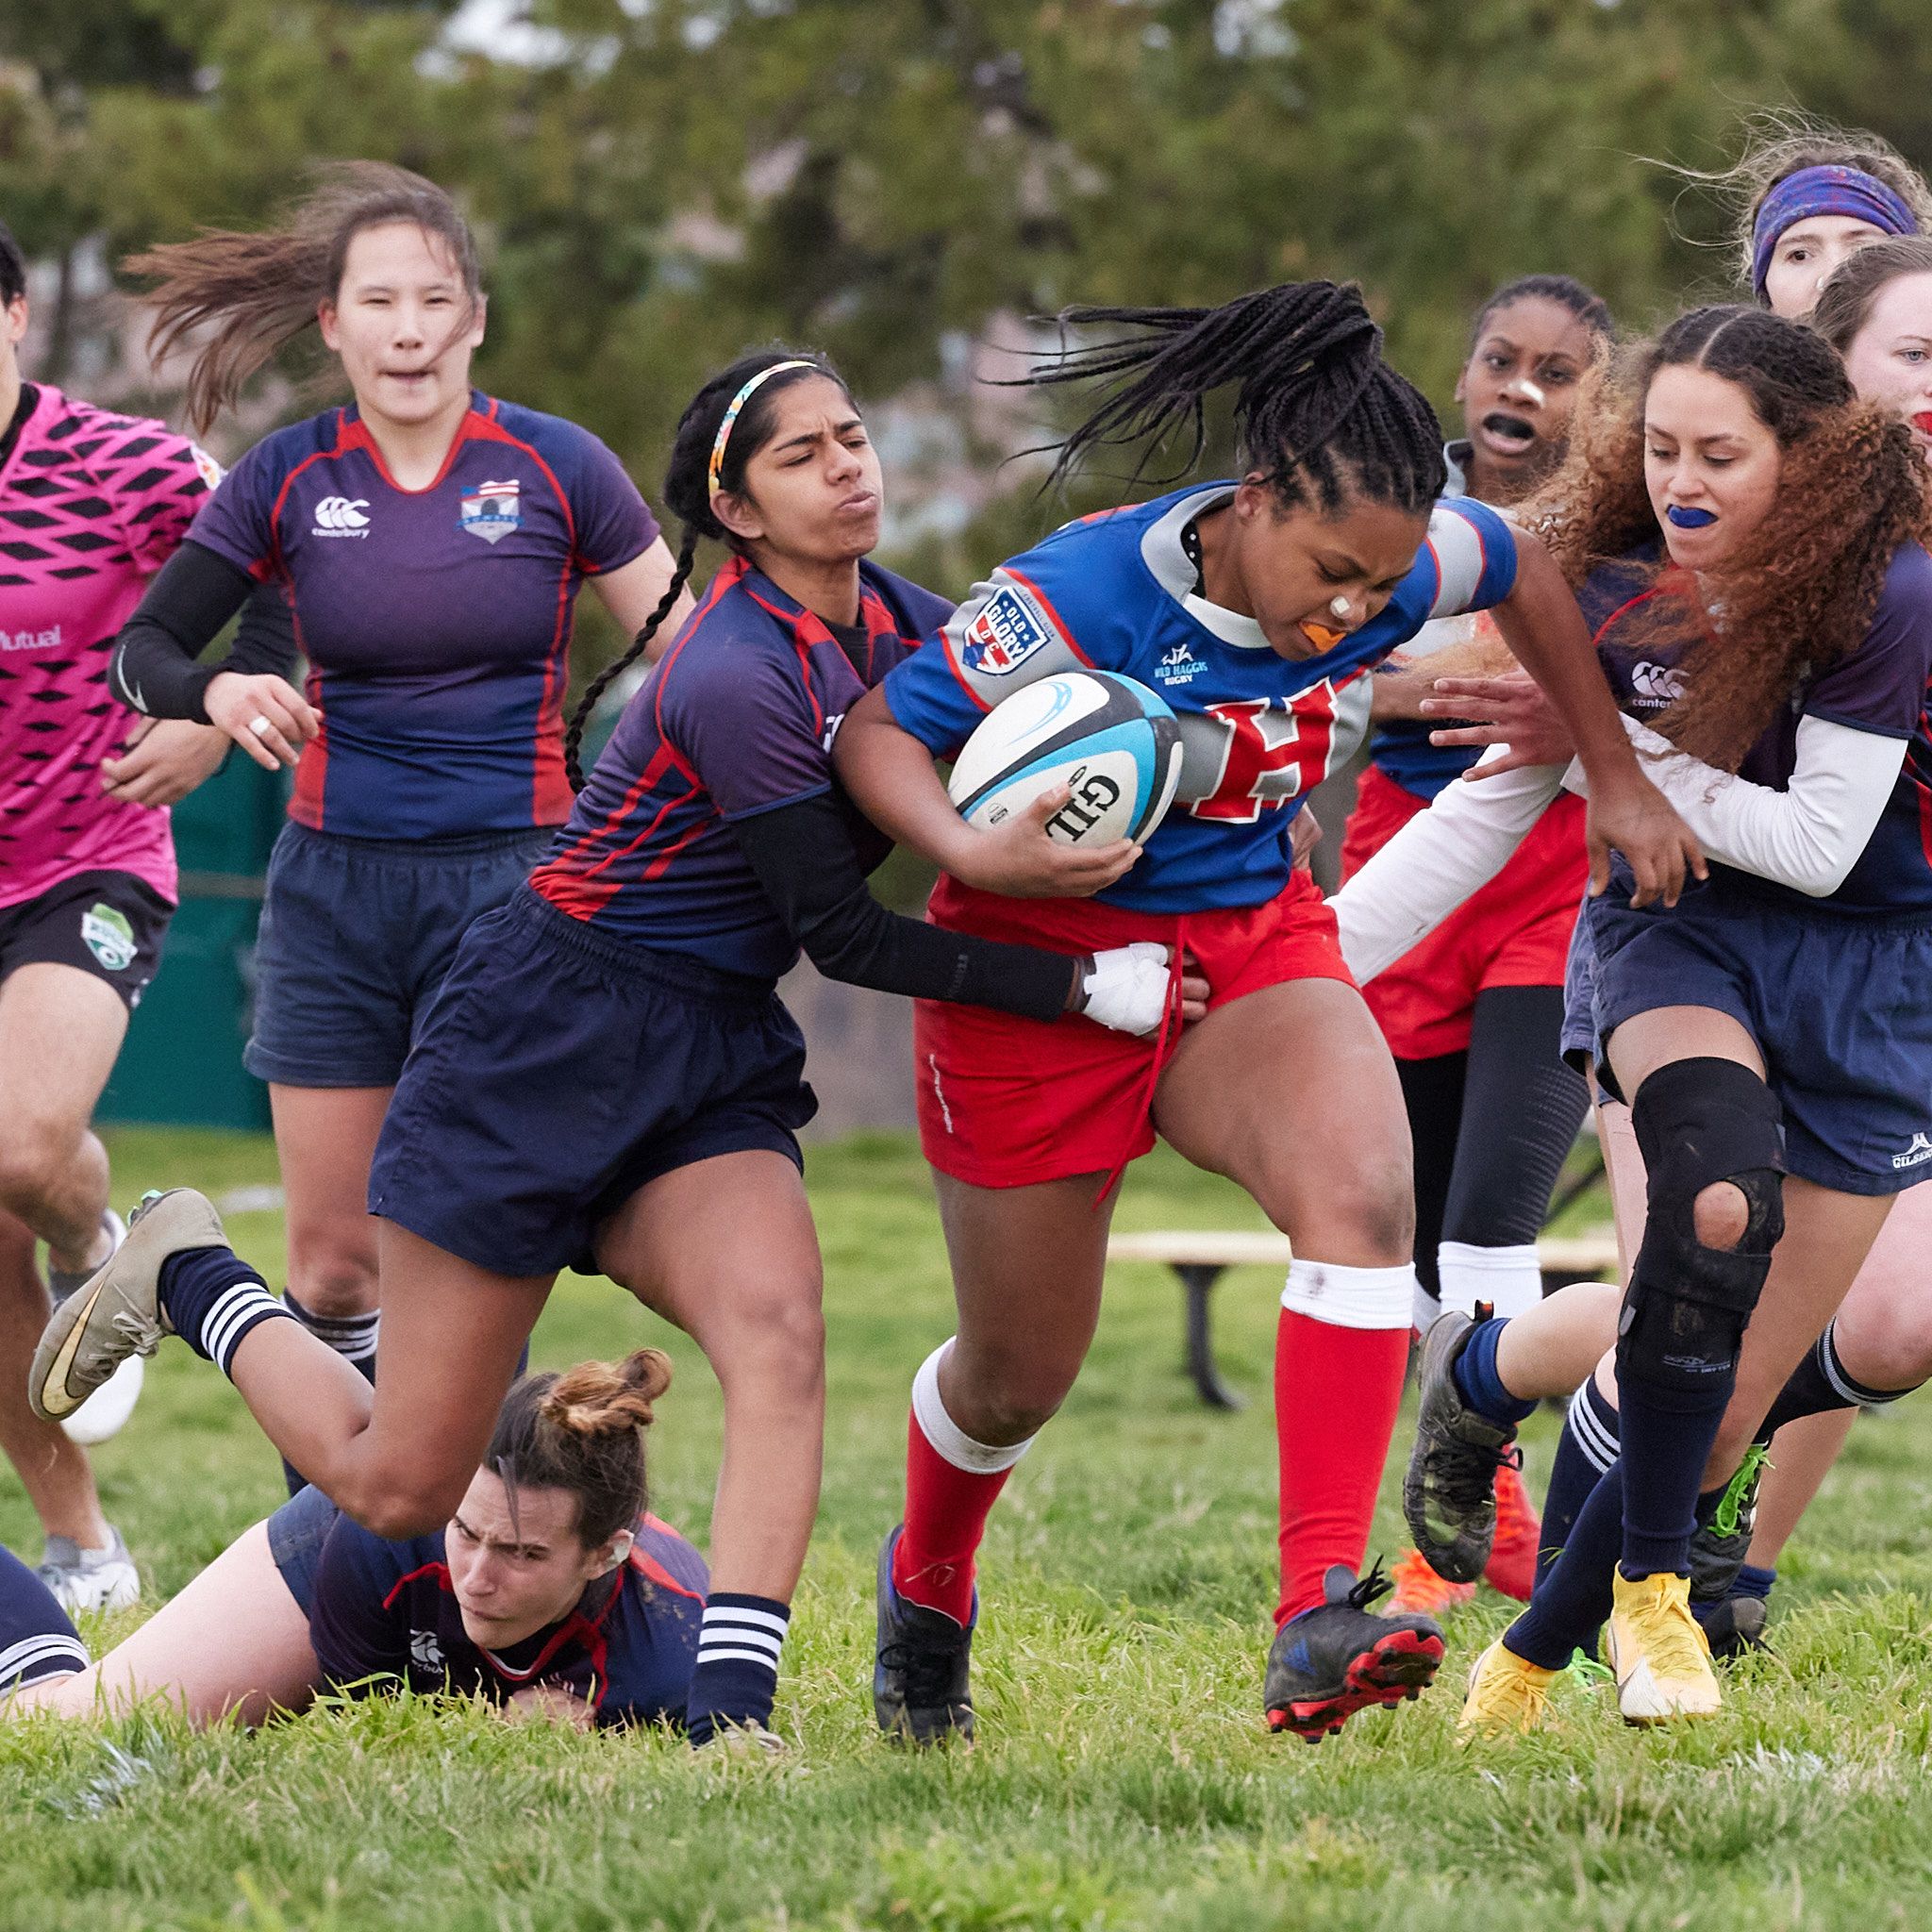 An athlete from Howard University's Women's+ Rugby club advances the ball during a match on March 26th, 2022.